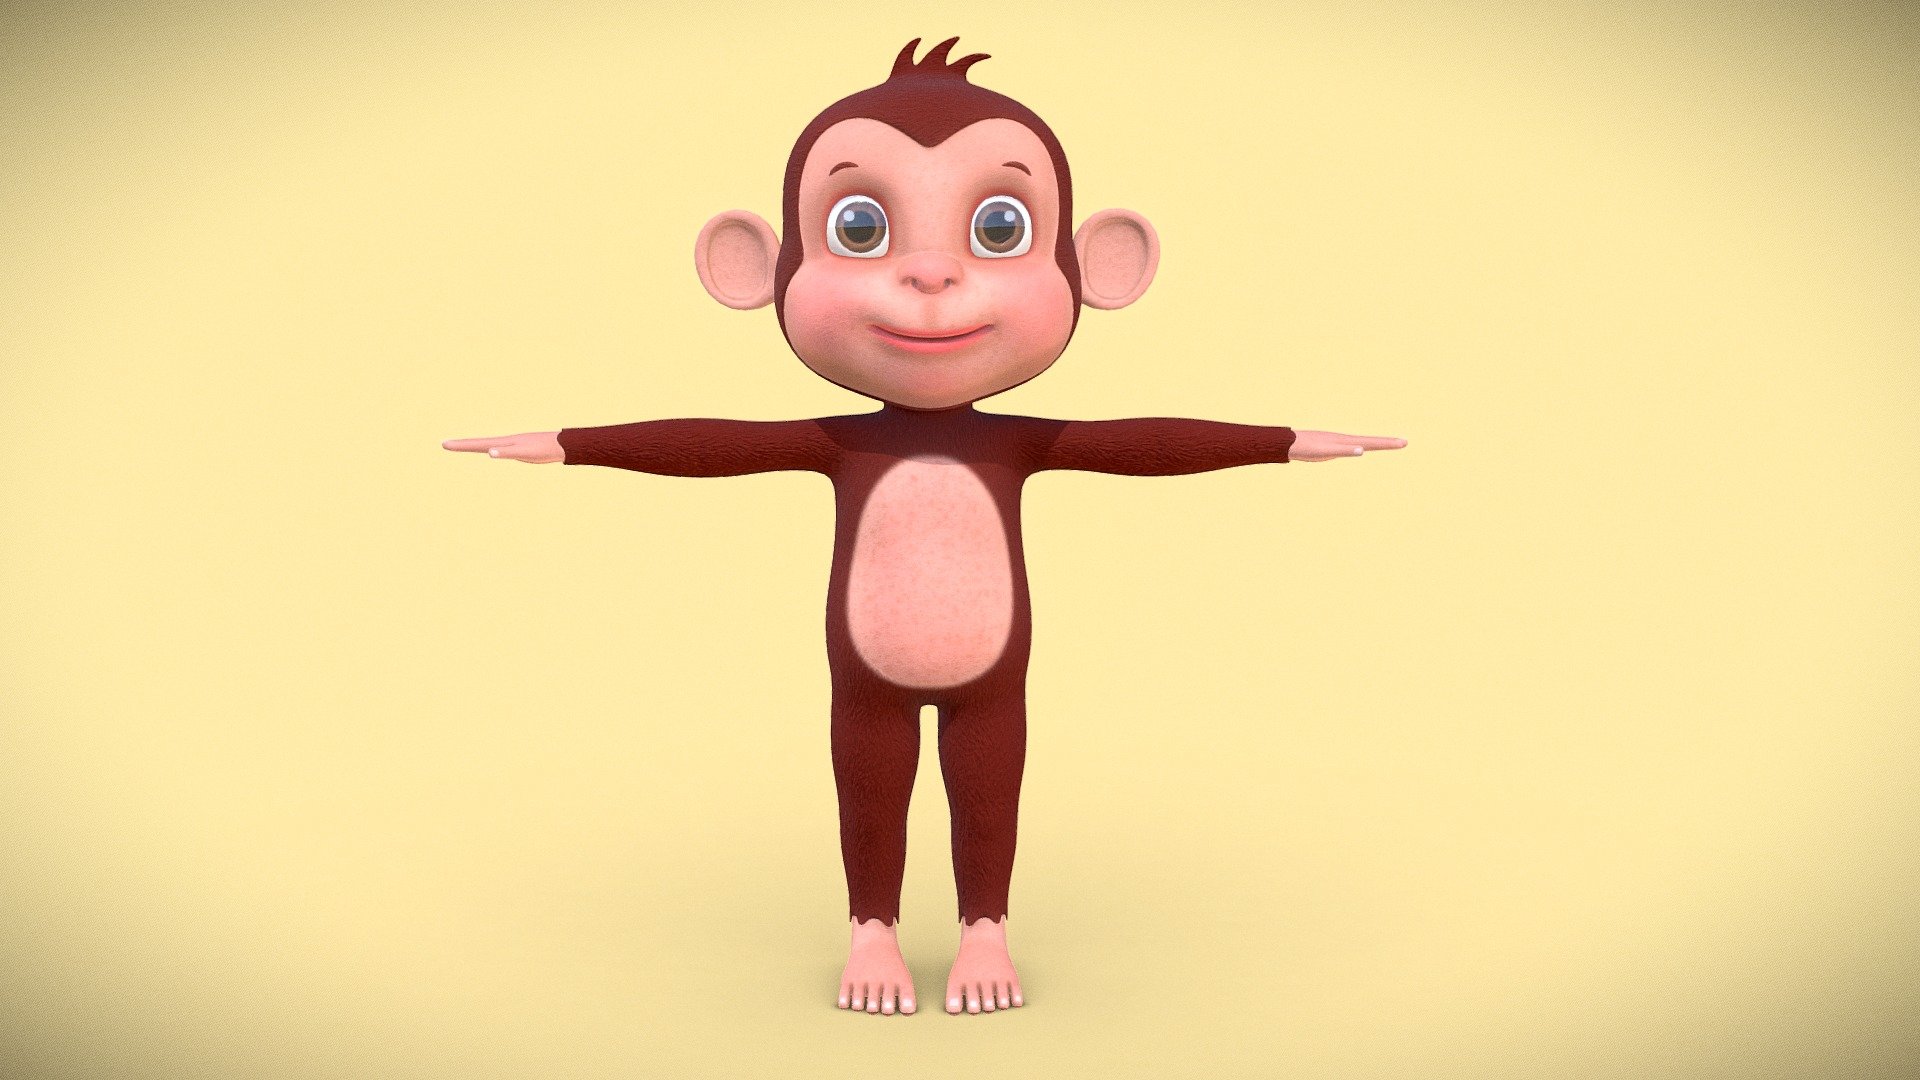 Cartoon monkey character 3d model. This cartoon monkey is perfect for your game, cartoon or any other project. Originally created in max Maya and zbrush. 

The model is packed with high resolution pbr textures, ready to be used in modern games or film projects. Additional custom sail poses or higher resolution textures available on demand, reach out to me for more information on that 3d model